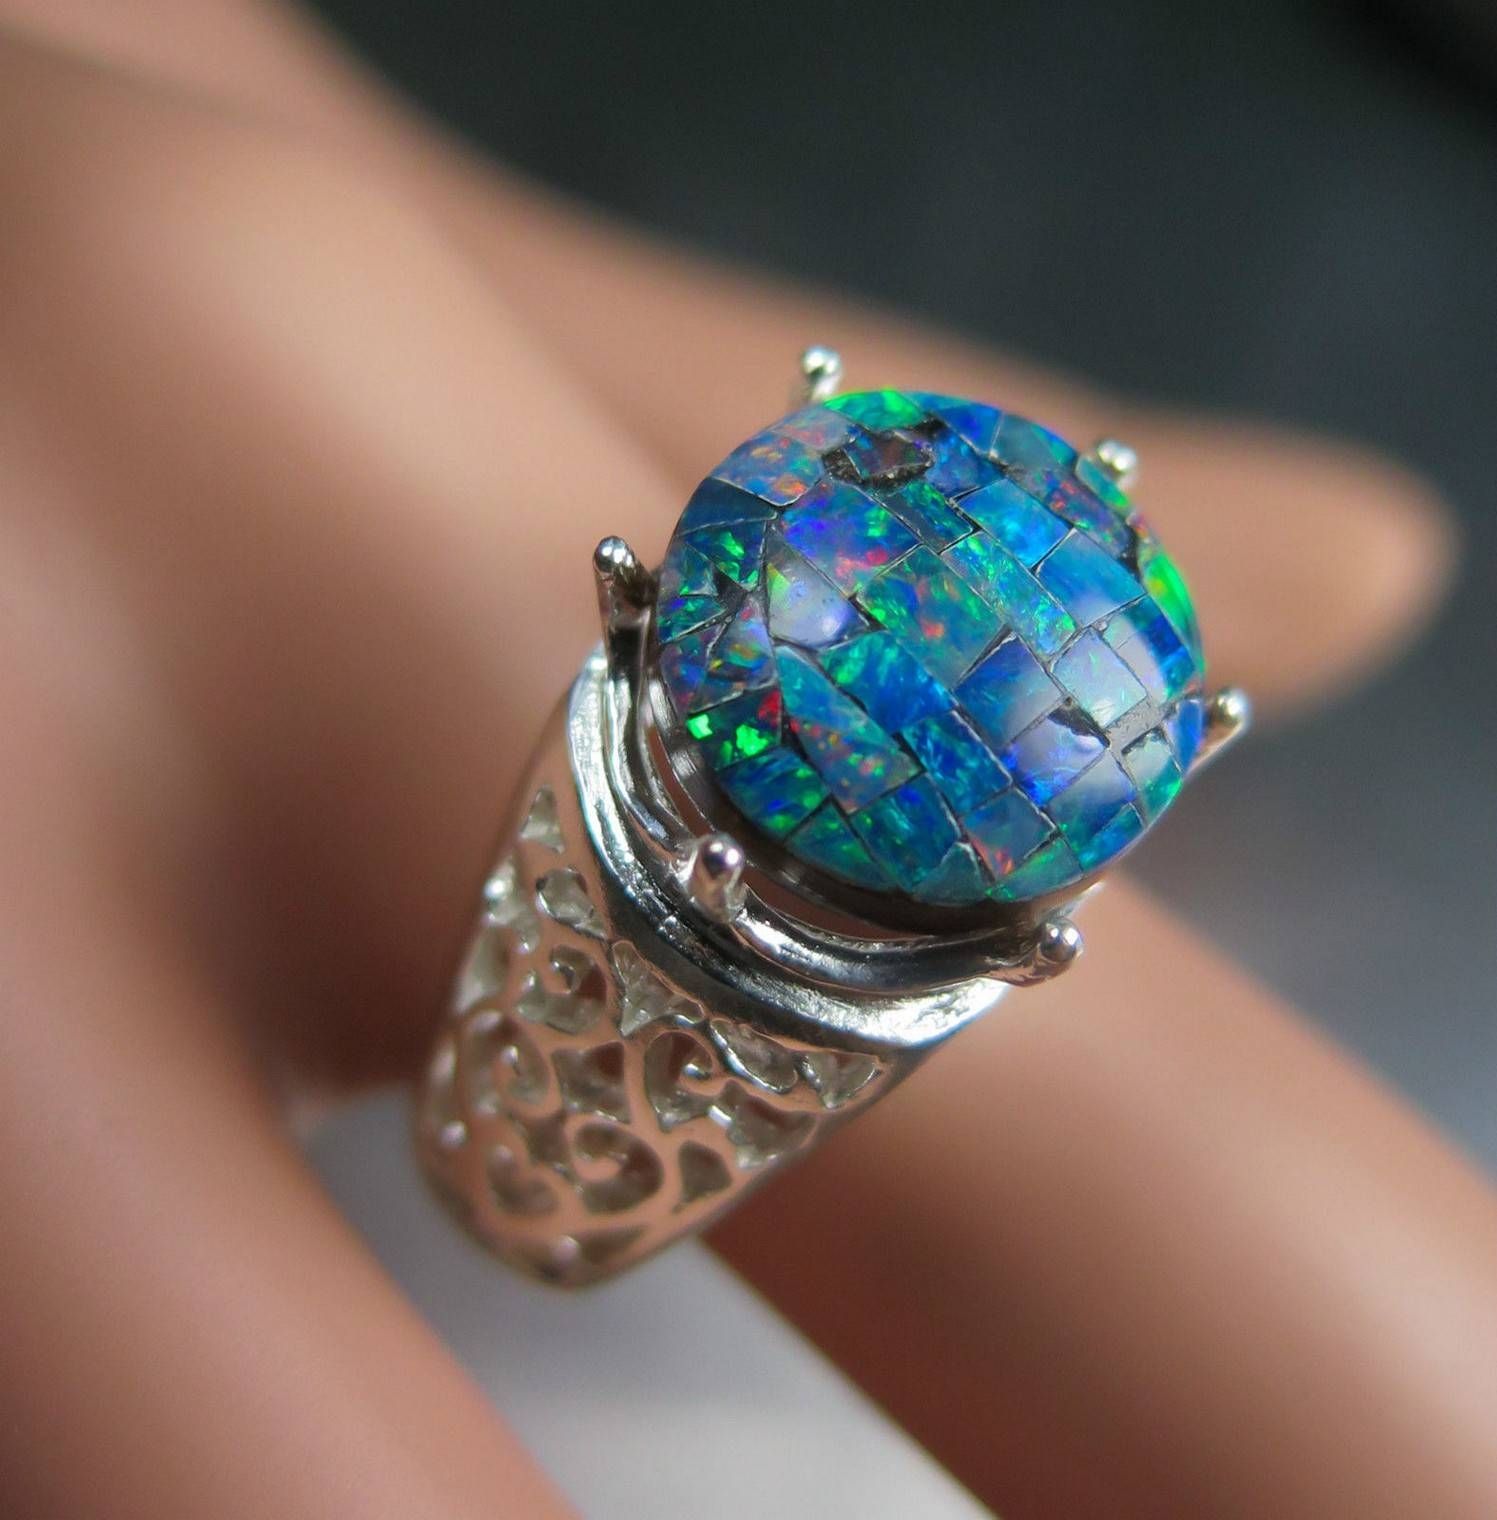 Black Opal Engagement Rings For Your Best Ring Option Within Australia Opal Engagement Rings (View 10 of 15)